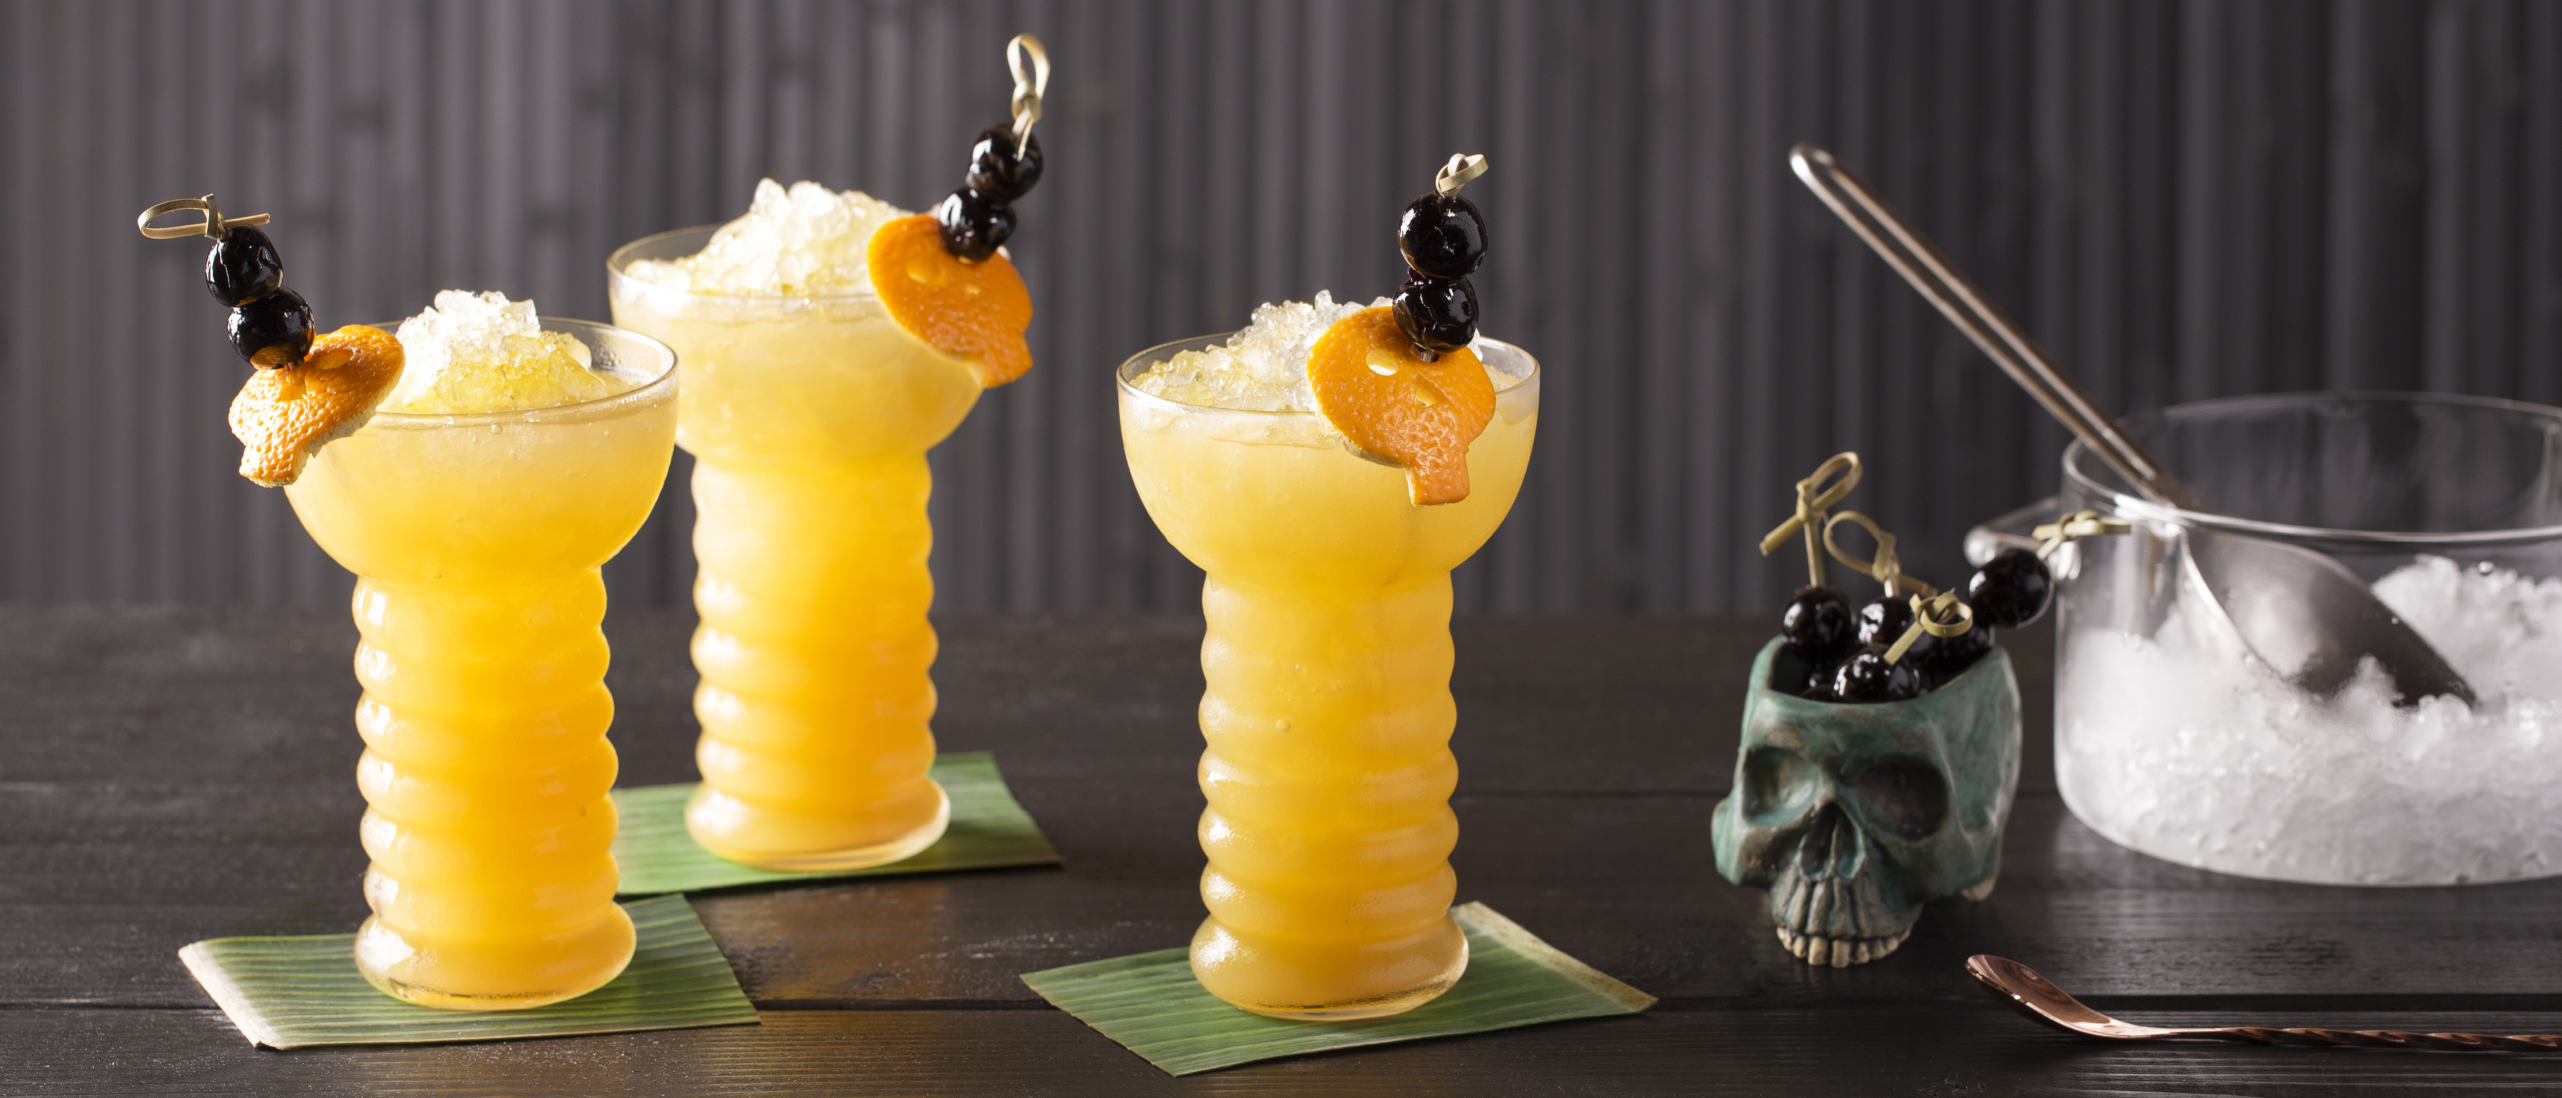 The Best Halloween-Inspired Cocktails And Drinks To Wow A Crowd